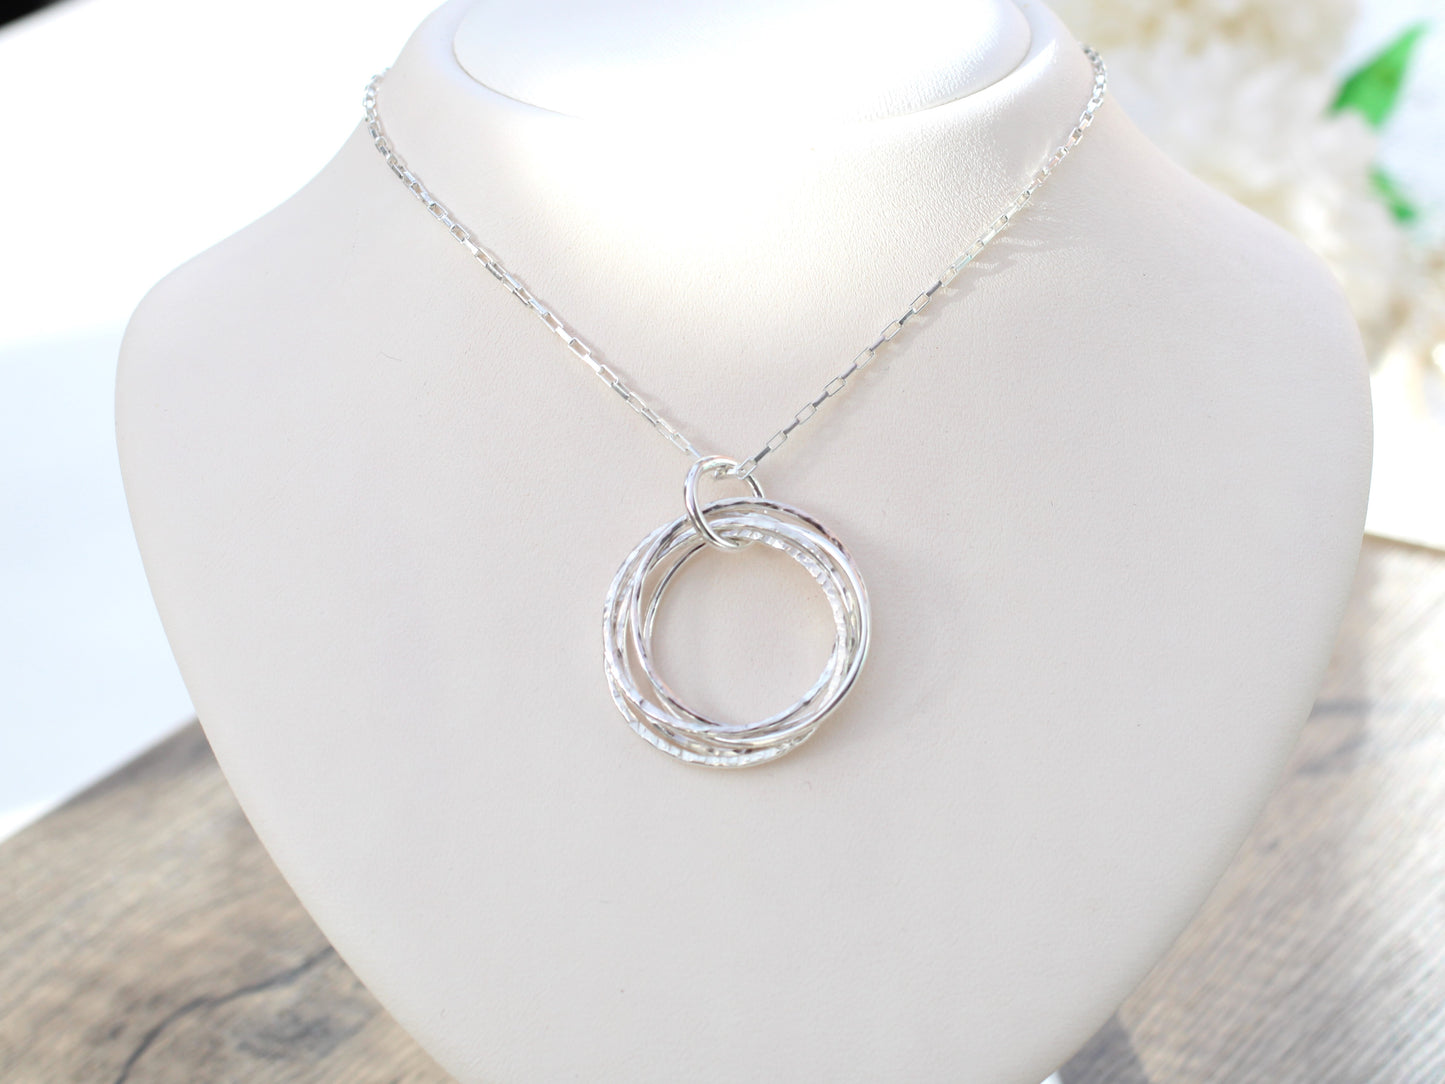 50th birthday necklace. 5 circle necklace.